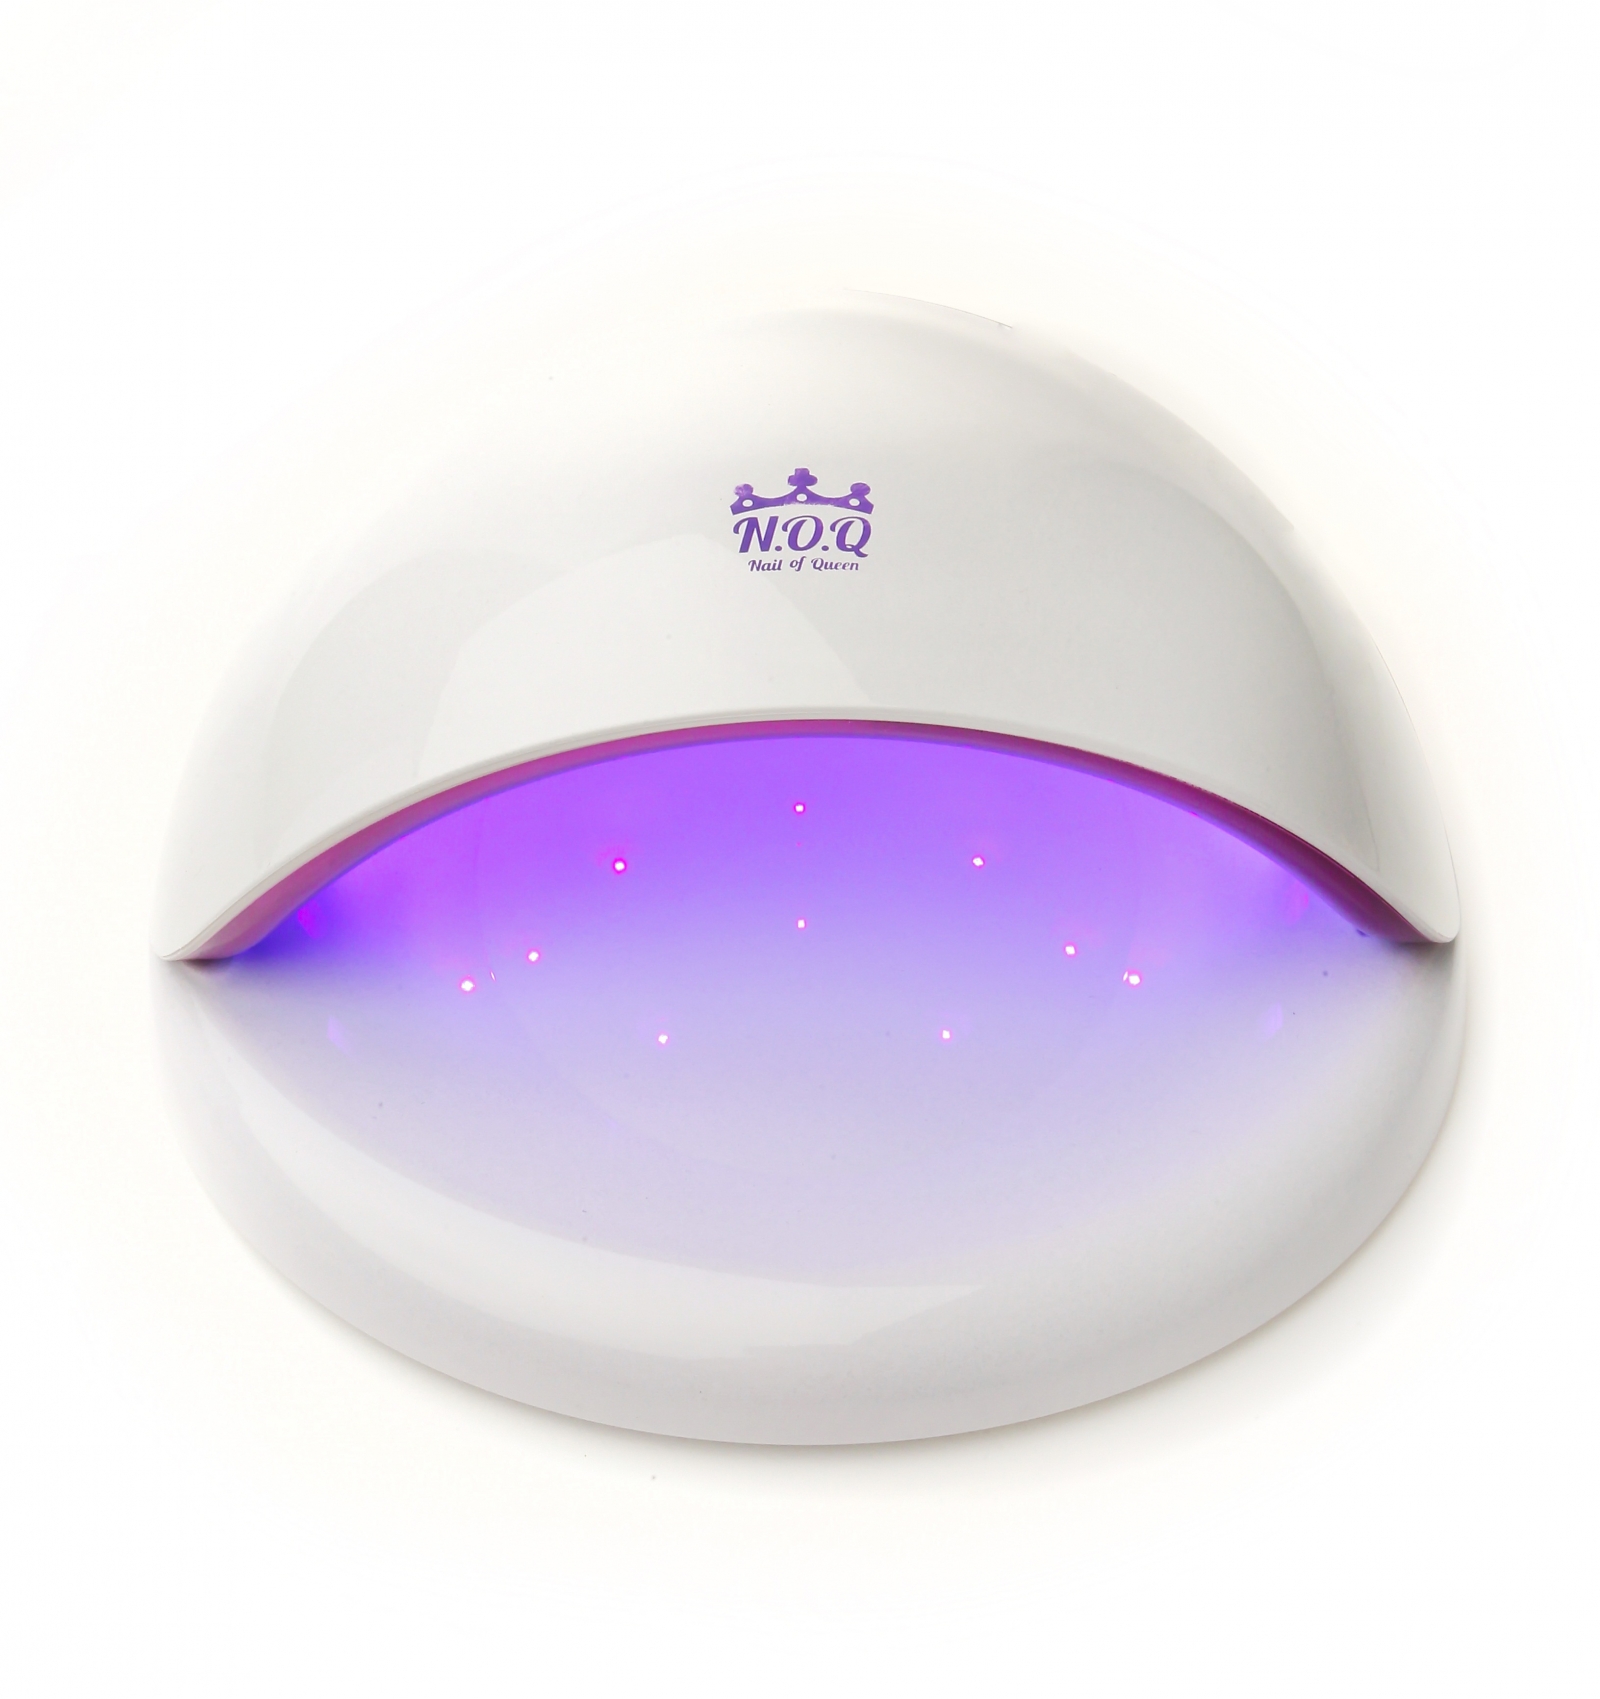 NOQ Nail Of Queen KL-S1 LED Salon System